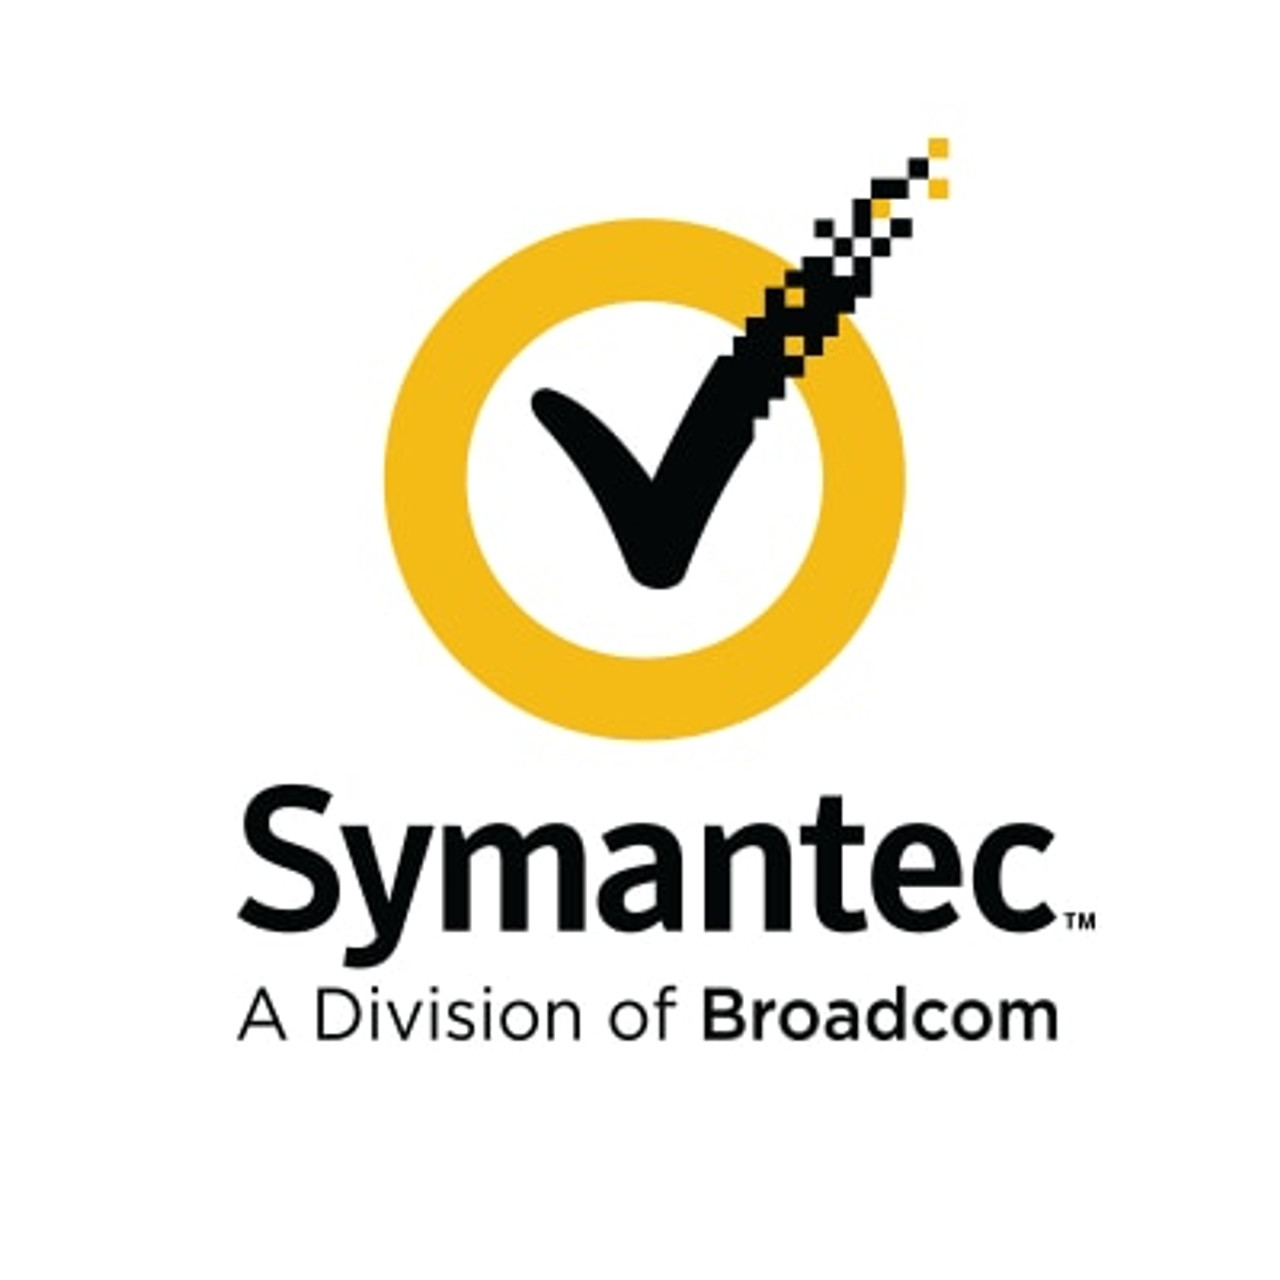 Symantec Complete Endpoint Defense (without SEP), Renewal Hybrid Subscription License with Support, 25,000-49,999 Devices 1 YR